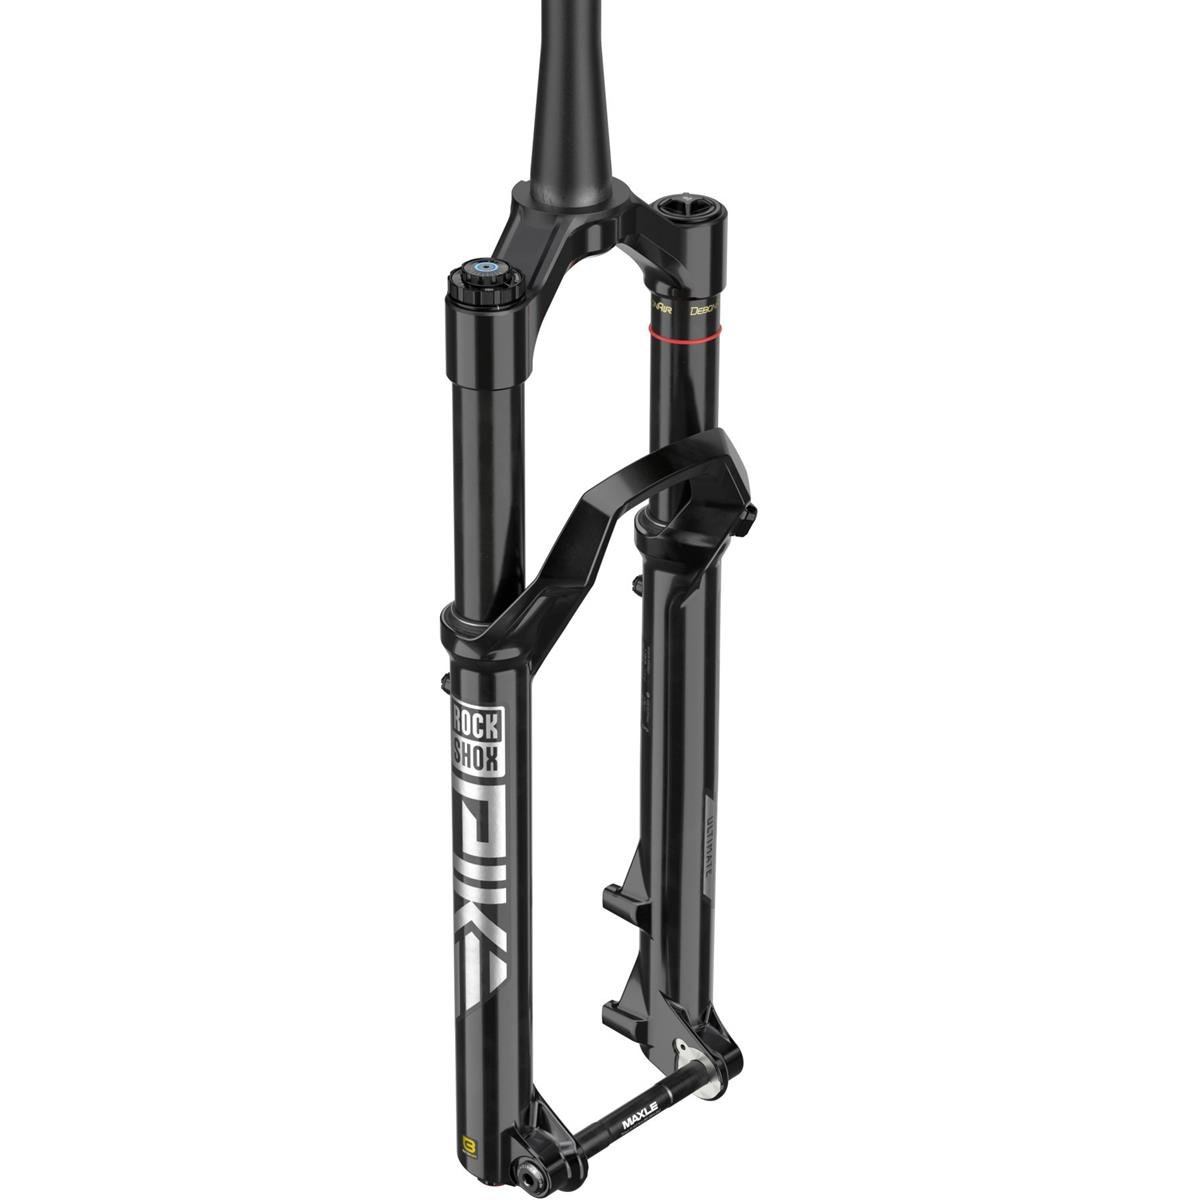 RockShox Fourche Pike Ultimate Charger 3 RC2 29 Pouces, 15x110 mm Boost, Noir, 44 mm Offset, 140 mm